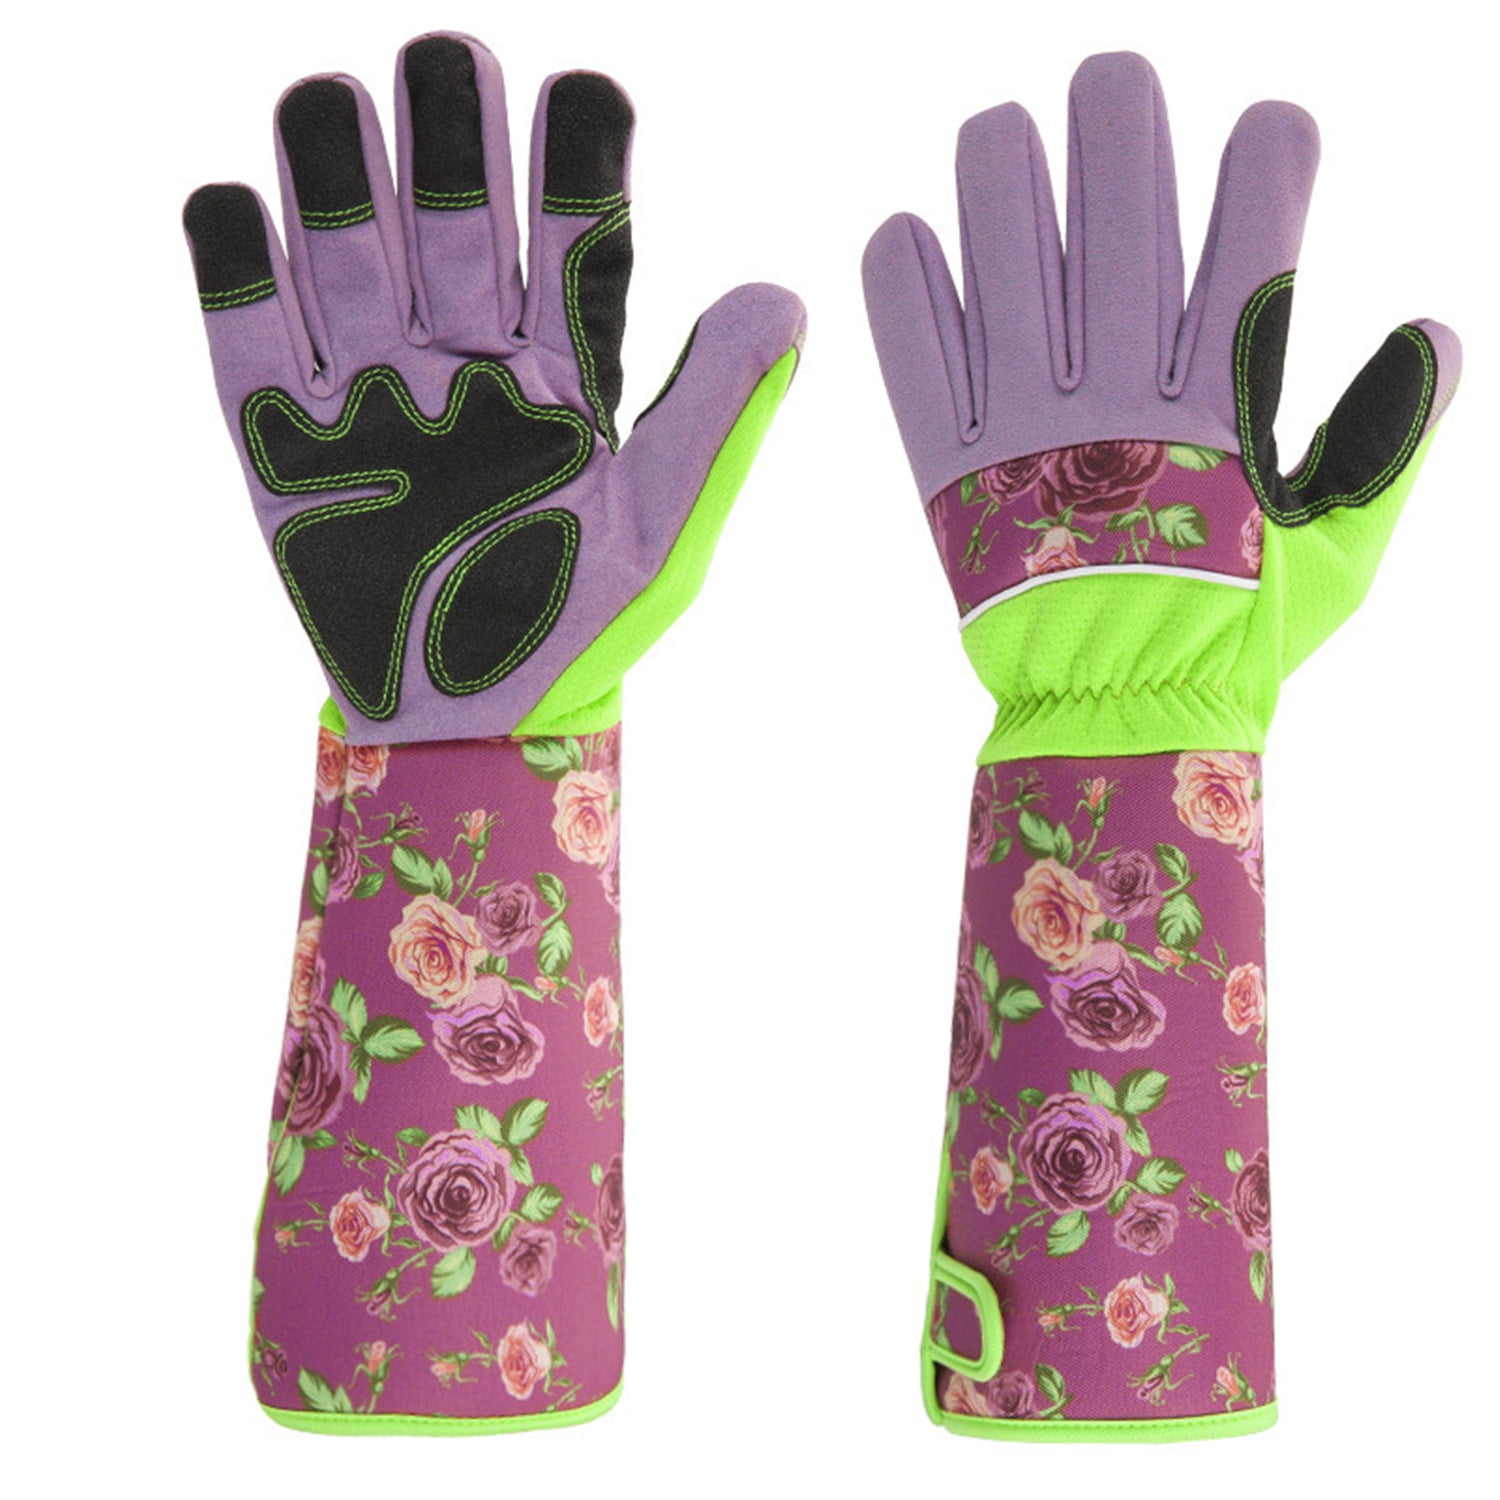 Gardening Gloves for Men & Women EIVOTOR Long Sleeve Thorn Proof Garden Gloves with Forearm Protection Leather Gauntlet 